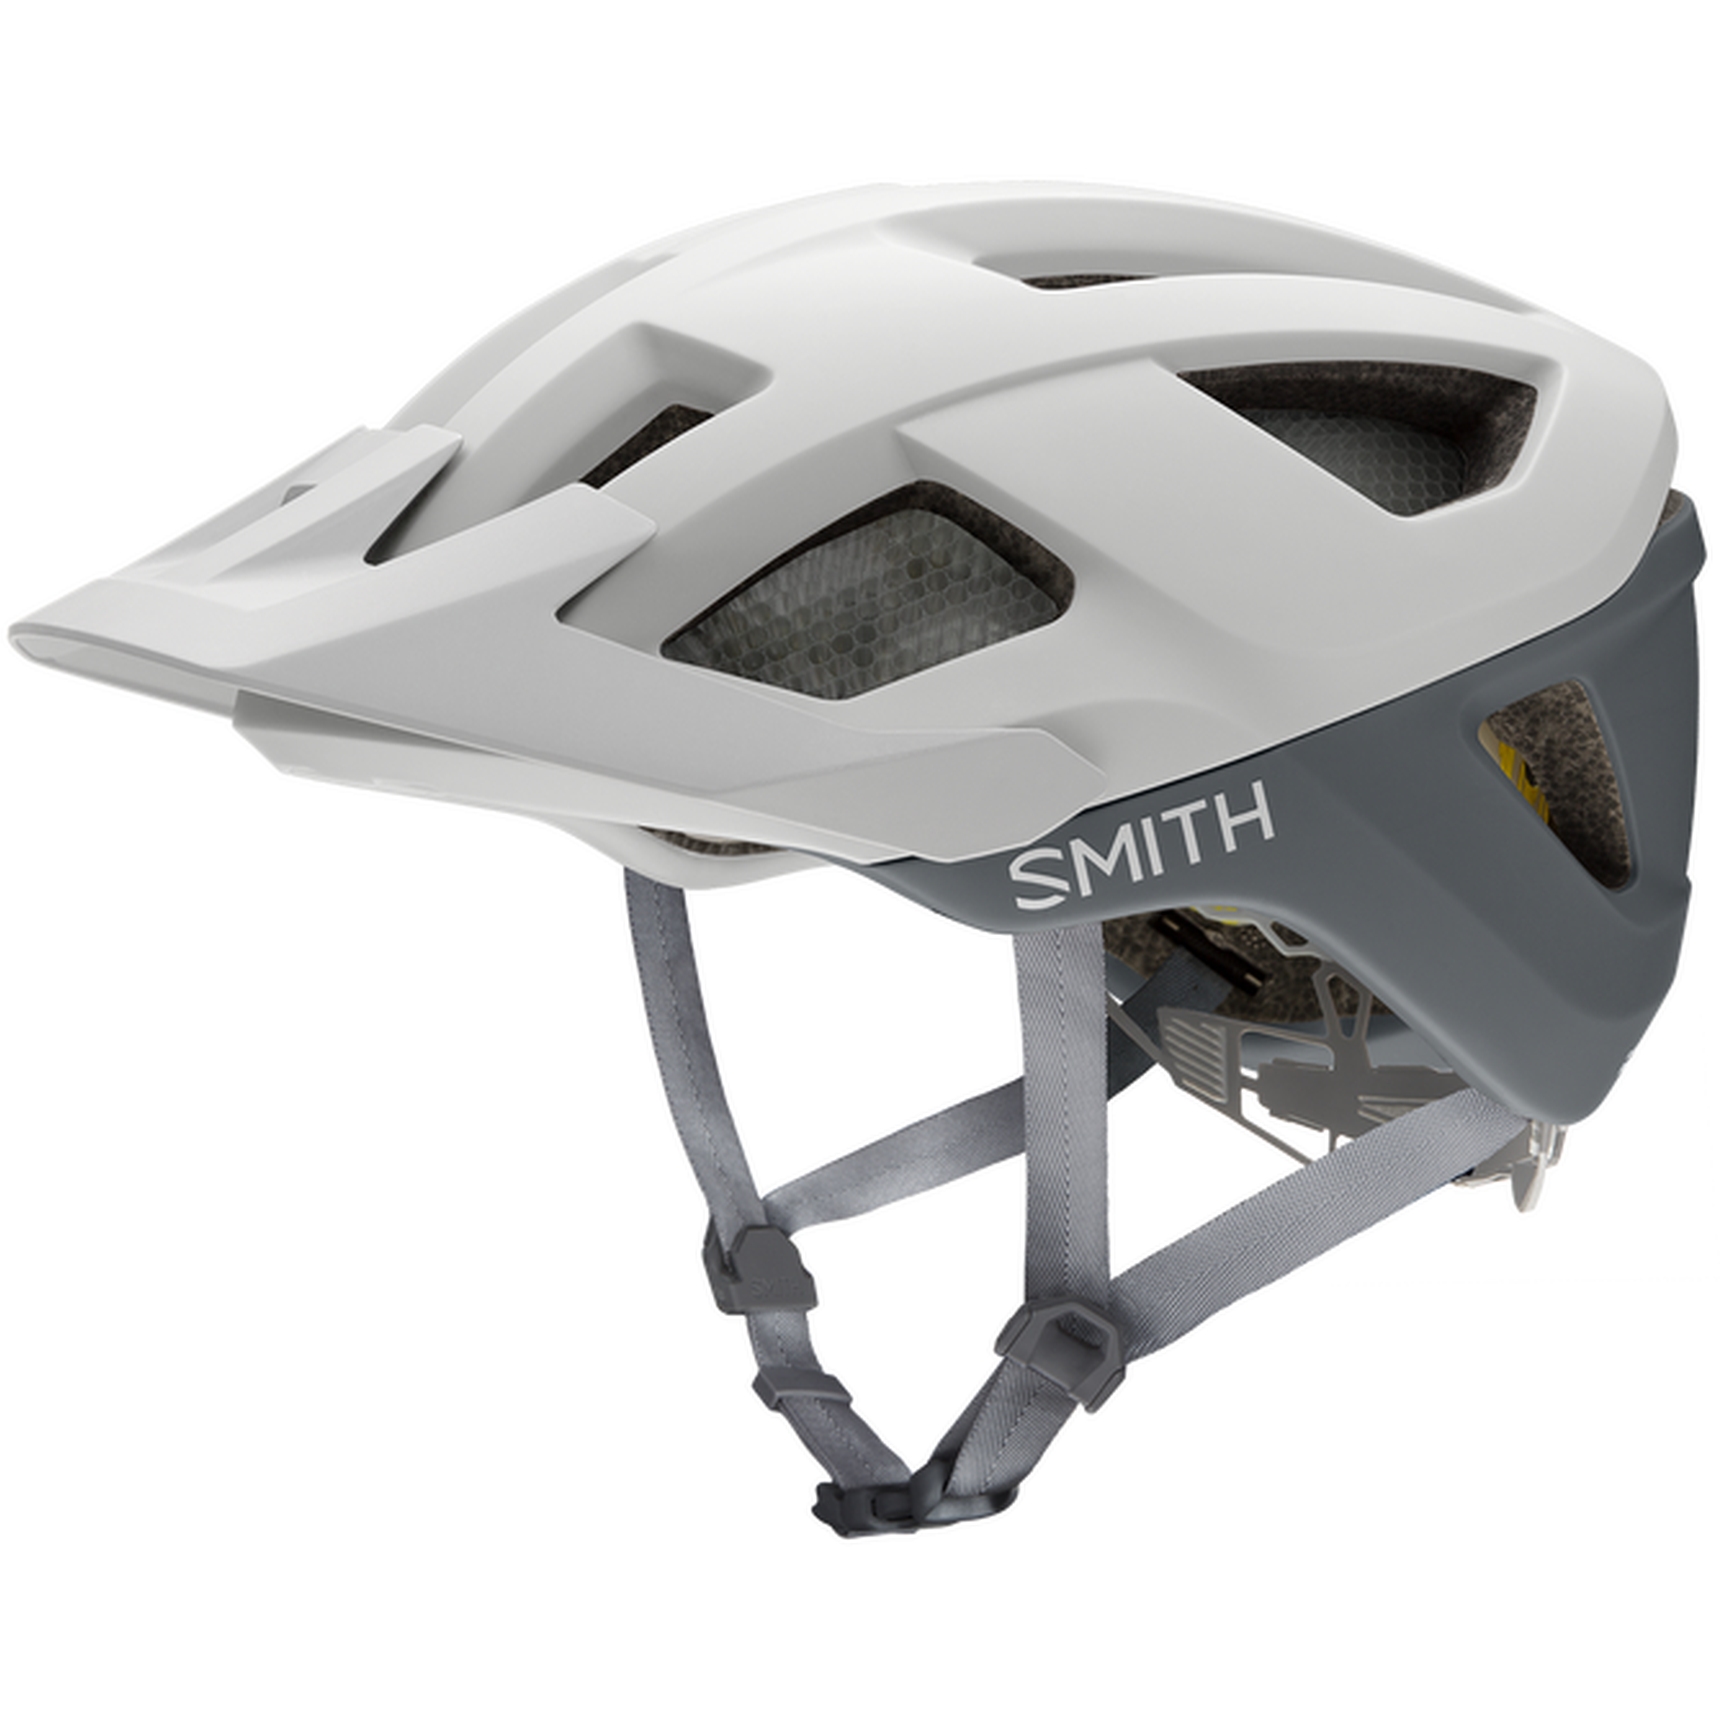 Productfoto van Smith Session MIPS Helm - Matte White - Cement